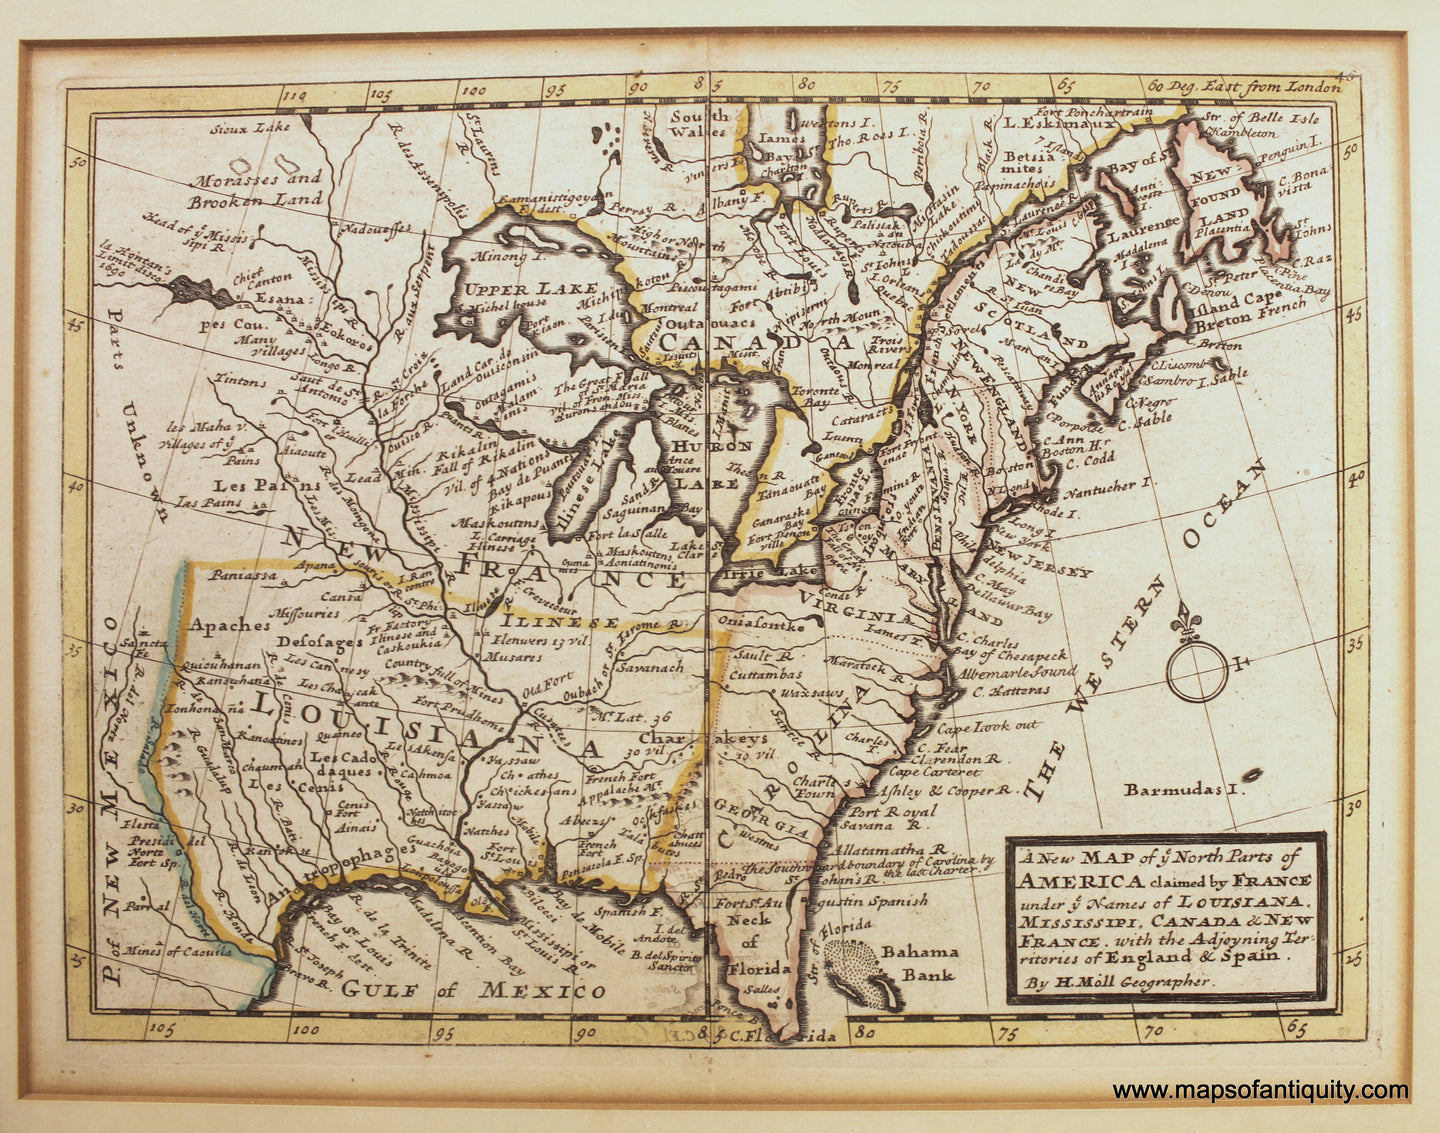 Genuine-Antique-Map-A-New-Map-of-ye-North-Parts-of-America-claimed-by-France-under-ye-Names-of-Louisiana-Mississippi-Canada-&-New-France.-With-the-Adjoining-Territories-of-England-&-Spain.-By-H.-Moll-Geographer-1735-Moll-Maps-Of-Antiquity